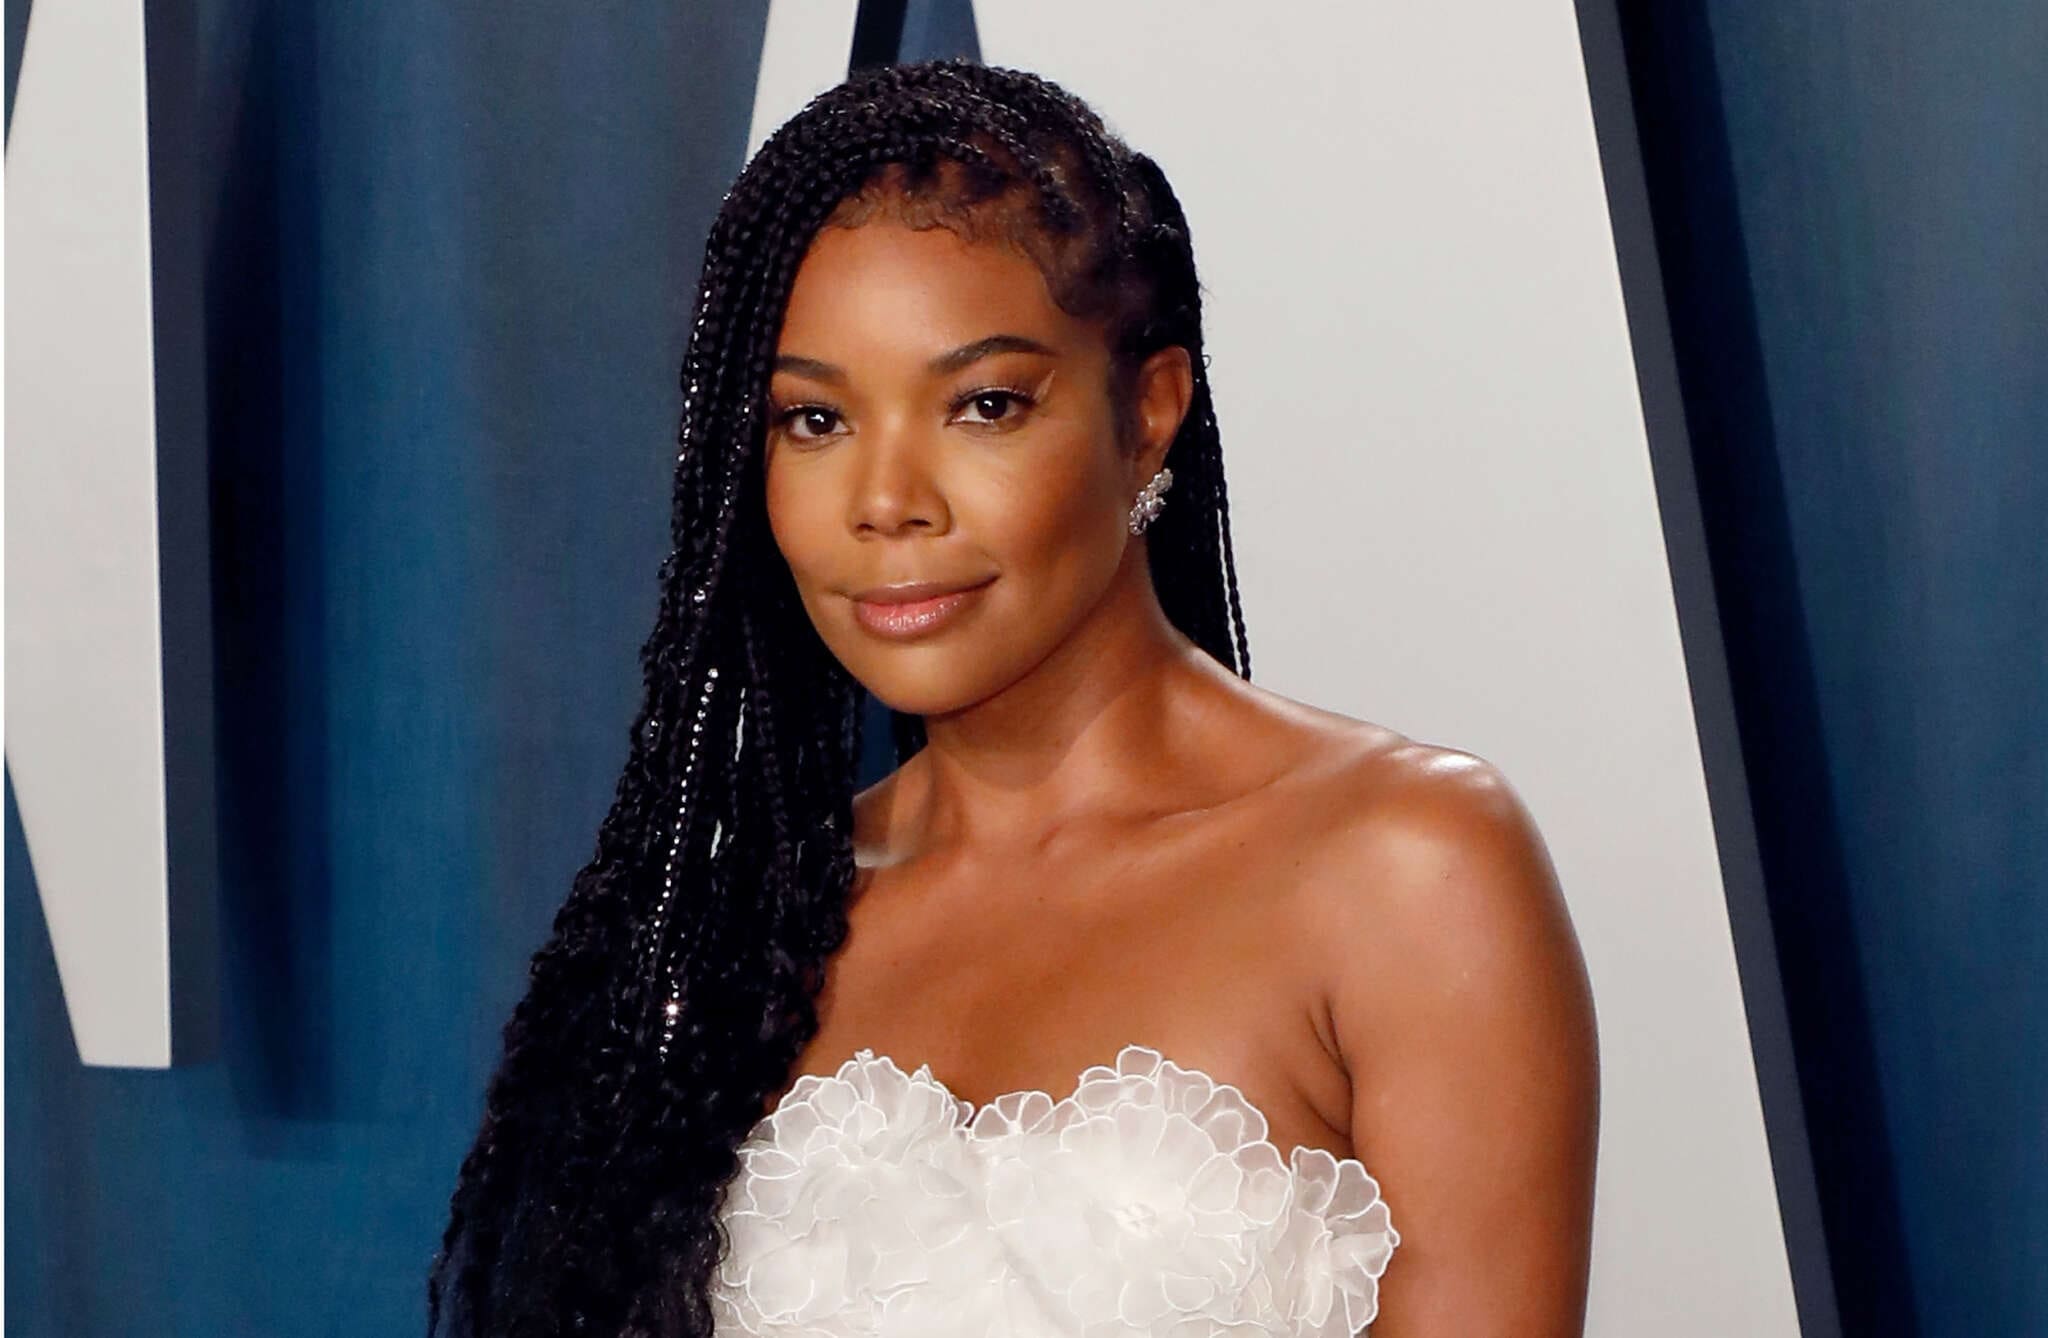 Gabrielle Union Publicly Praises Zaya Wade - See The Emotional Message She Shared